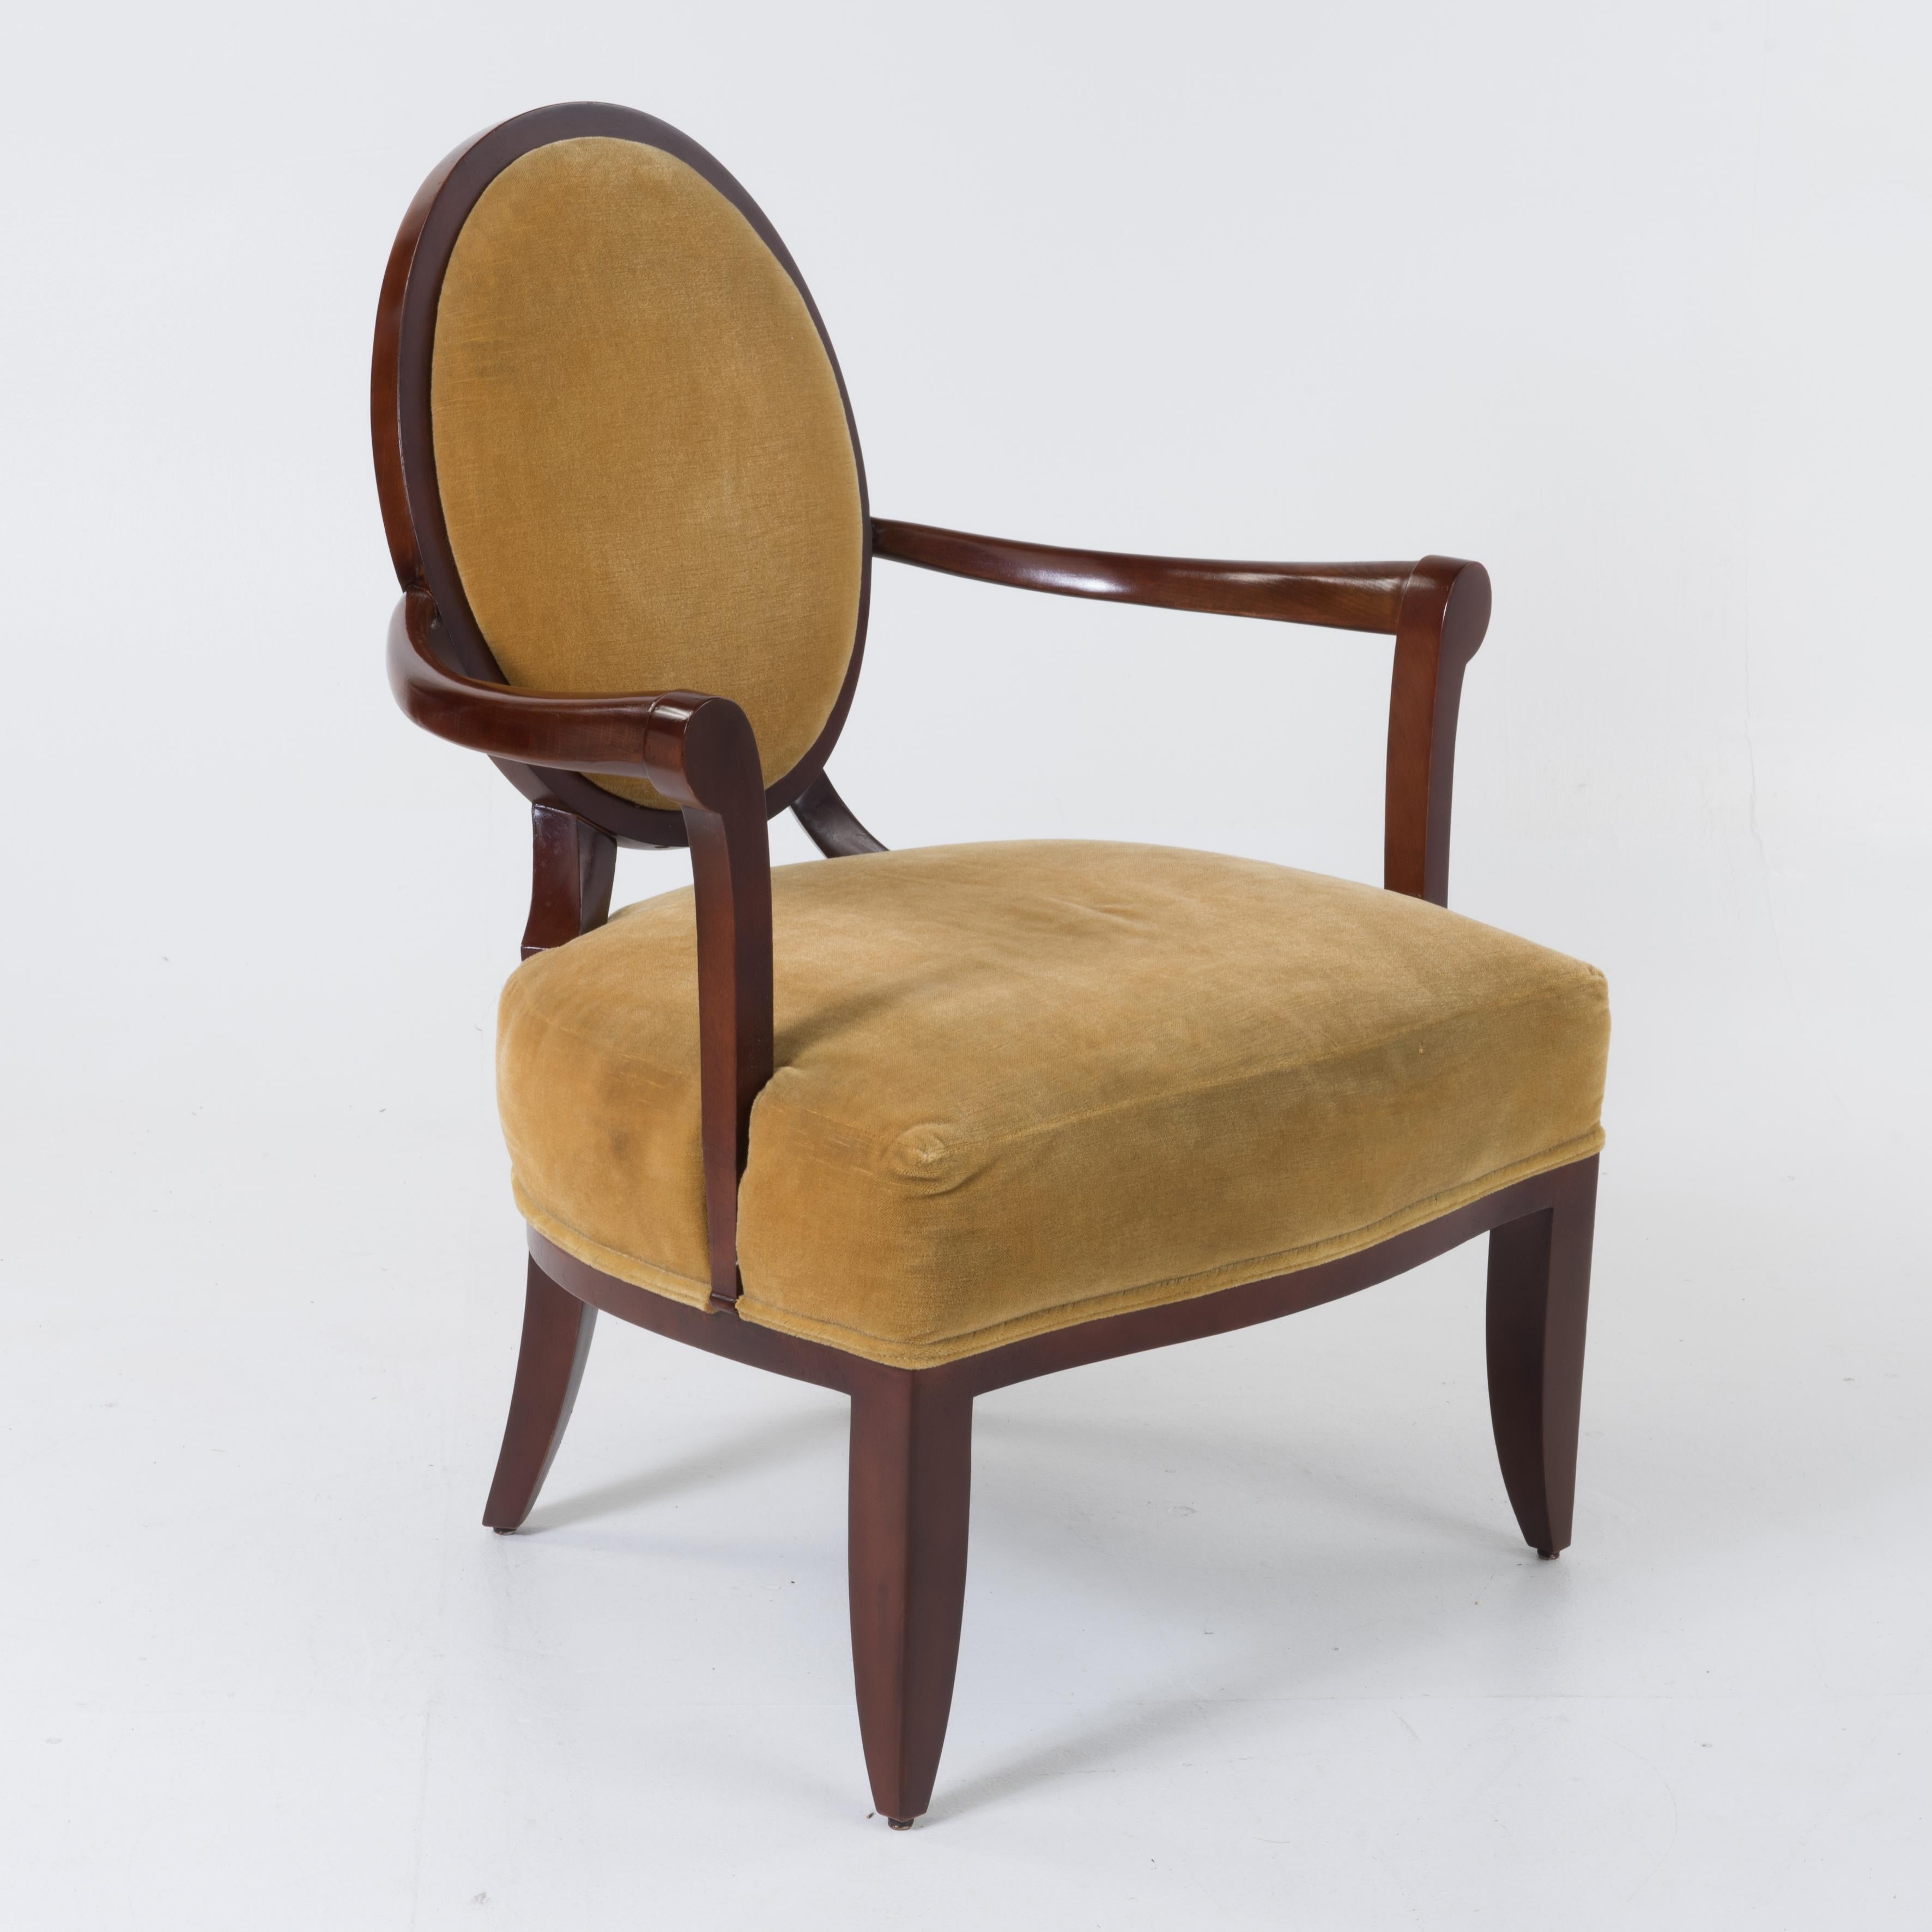 North American Sumptuous Barbara Barry Regency Style Mahogany Arm Chair